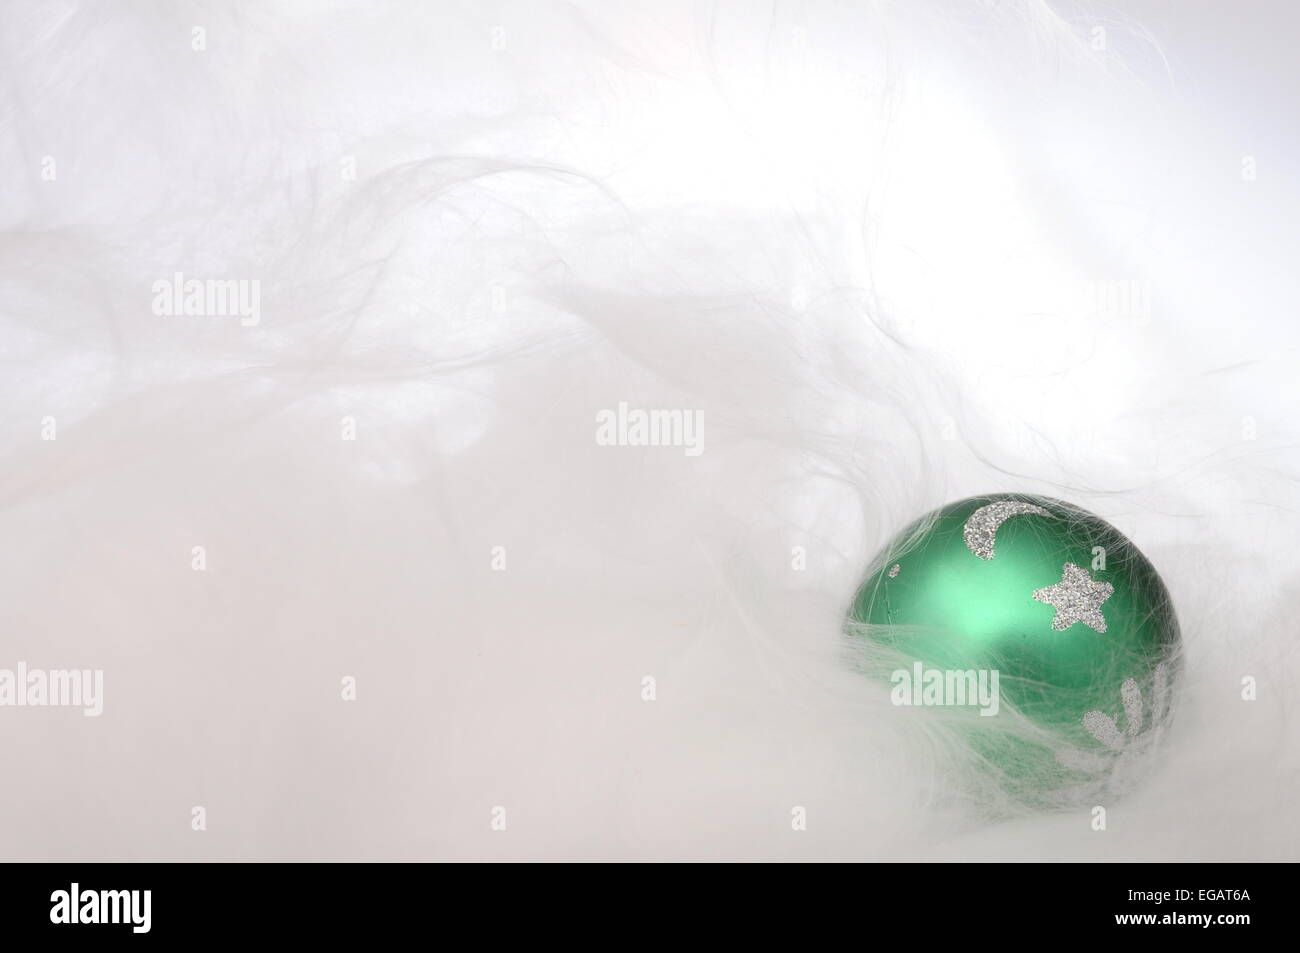 Green Christmas Balls On White Background Of Angel S Hair For Merry Stock Photo Alamy